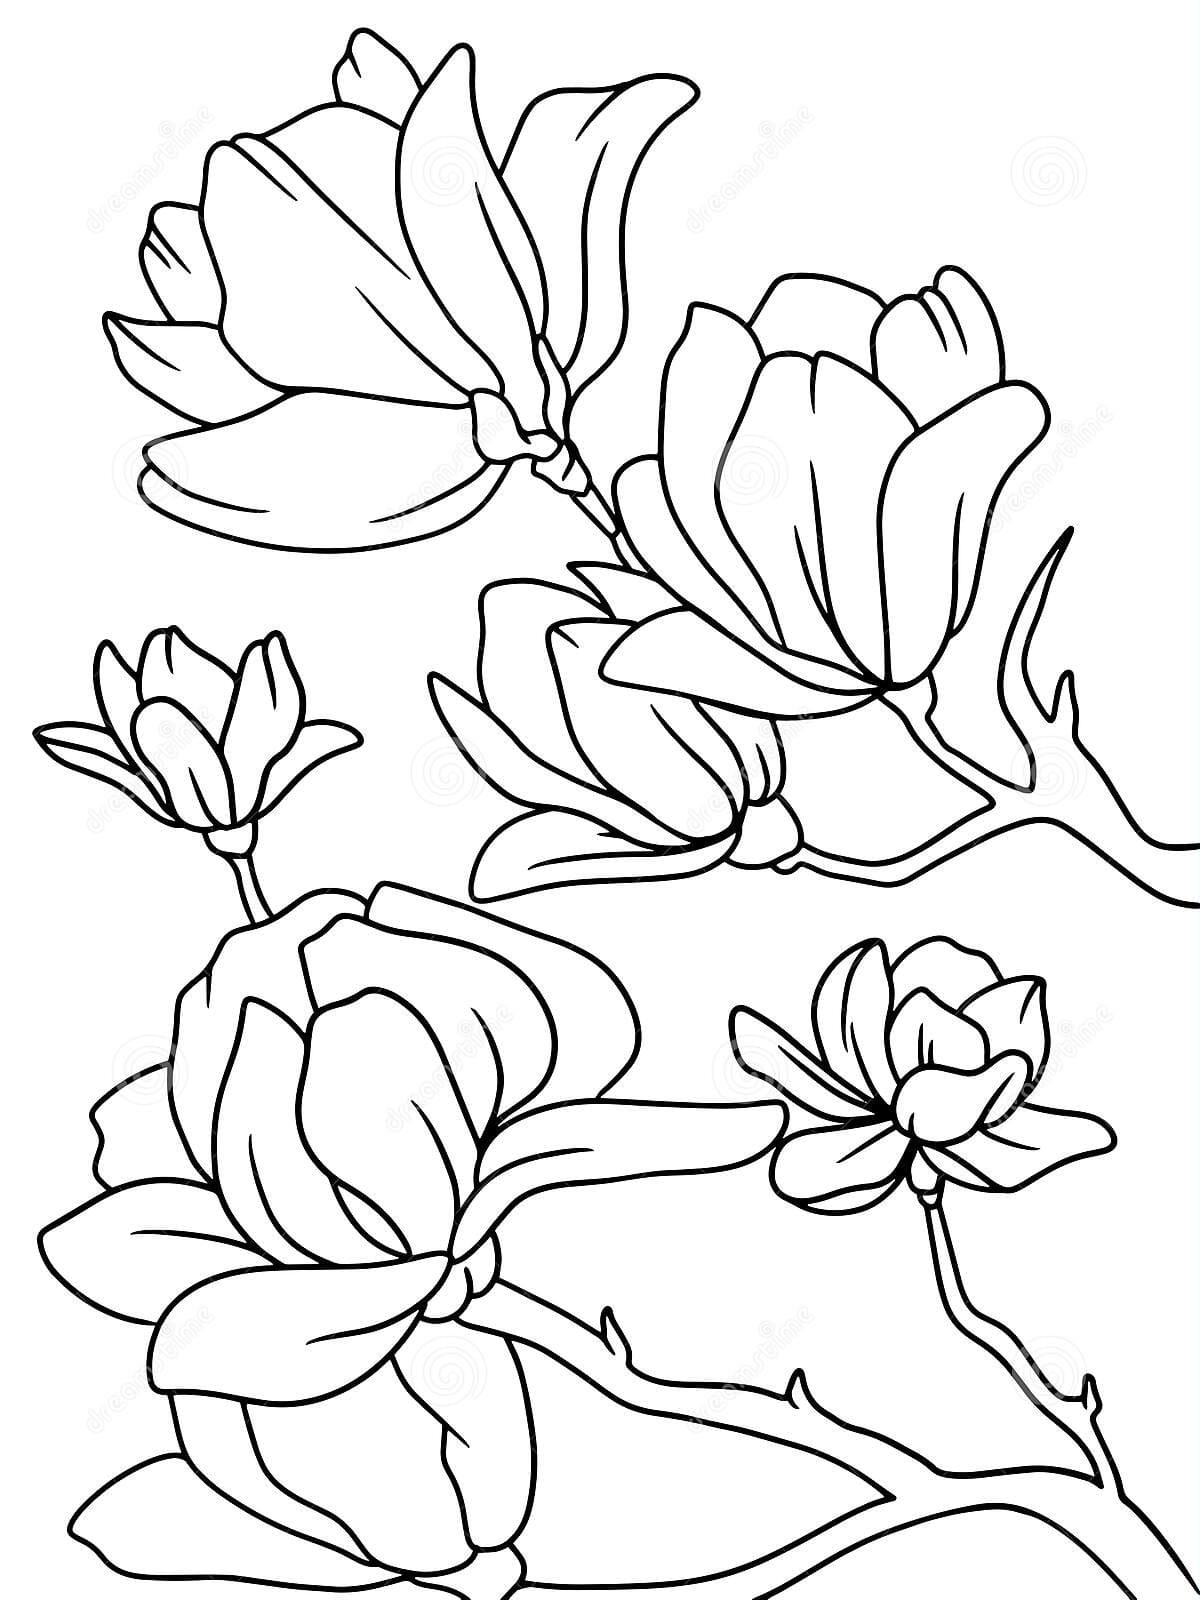 Coloring Magnolia Flower Image Free Coloring Page